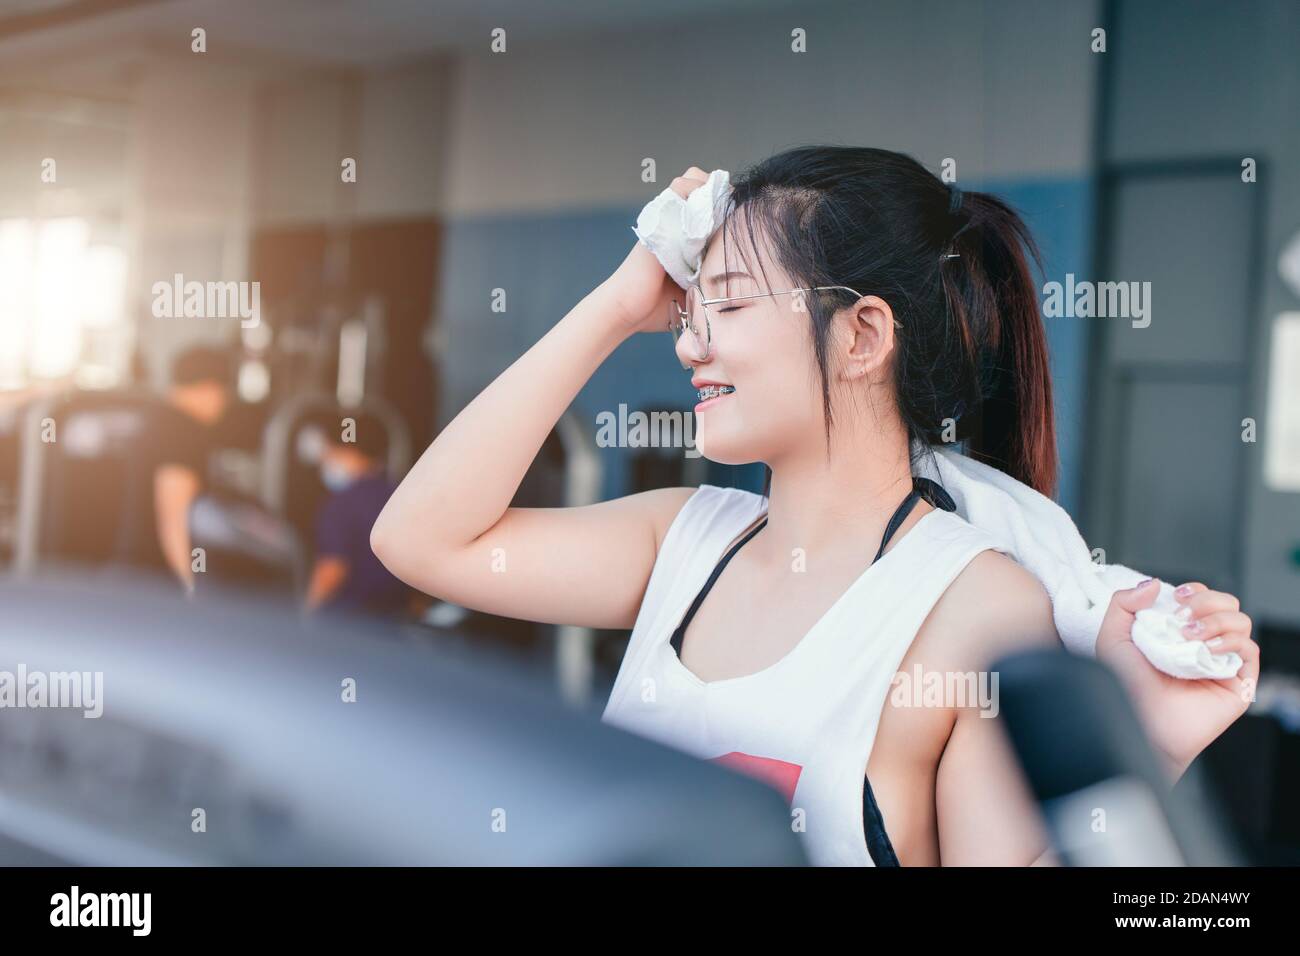 Asian braces girl using towel wiped her sweat after exercise in sport club every morning, she feel happy and smile after workout. Stock Photo